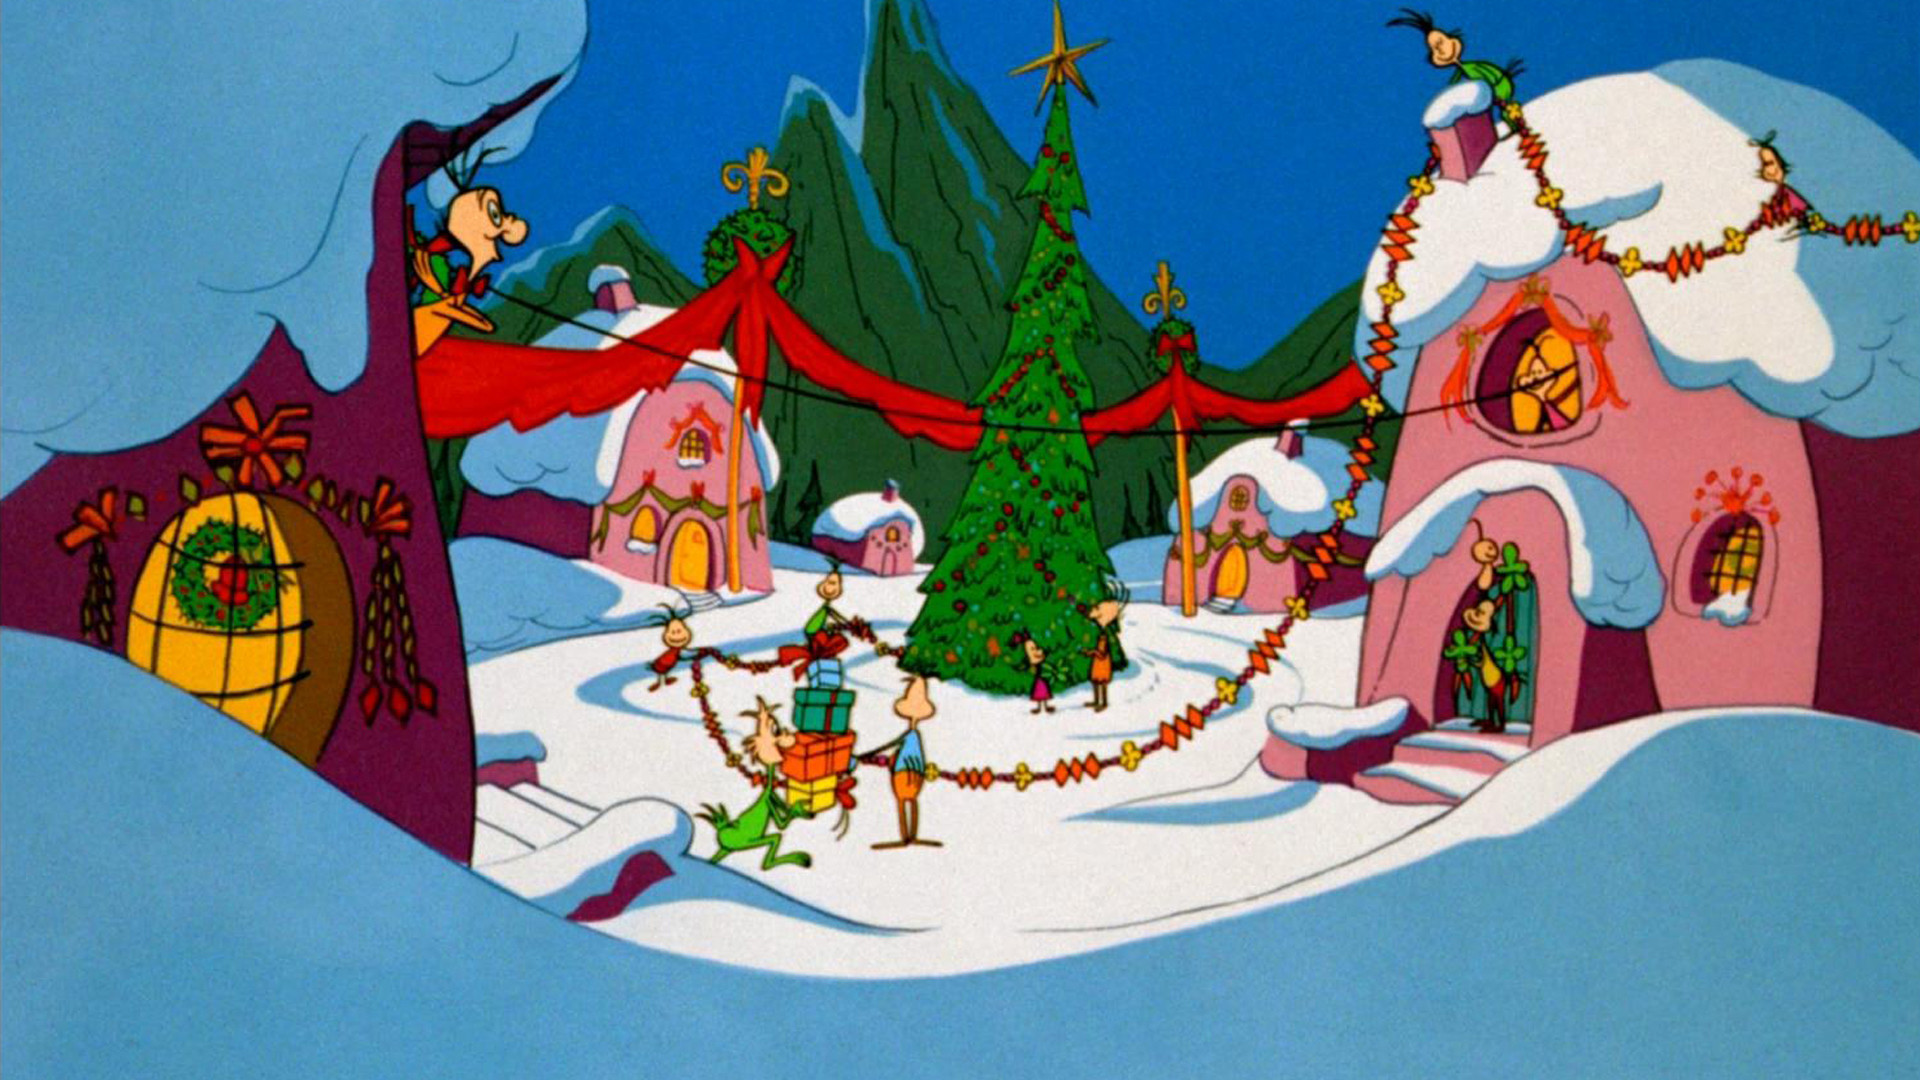 1920x1080 78+ images about :) How The Grinch Stole Christmas* on Pinterest